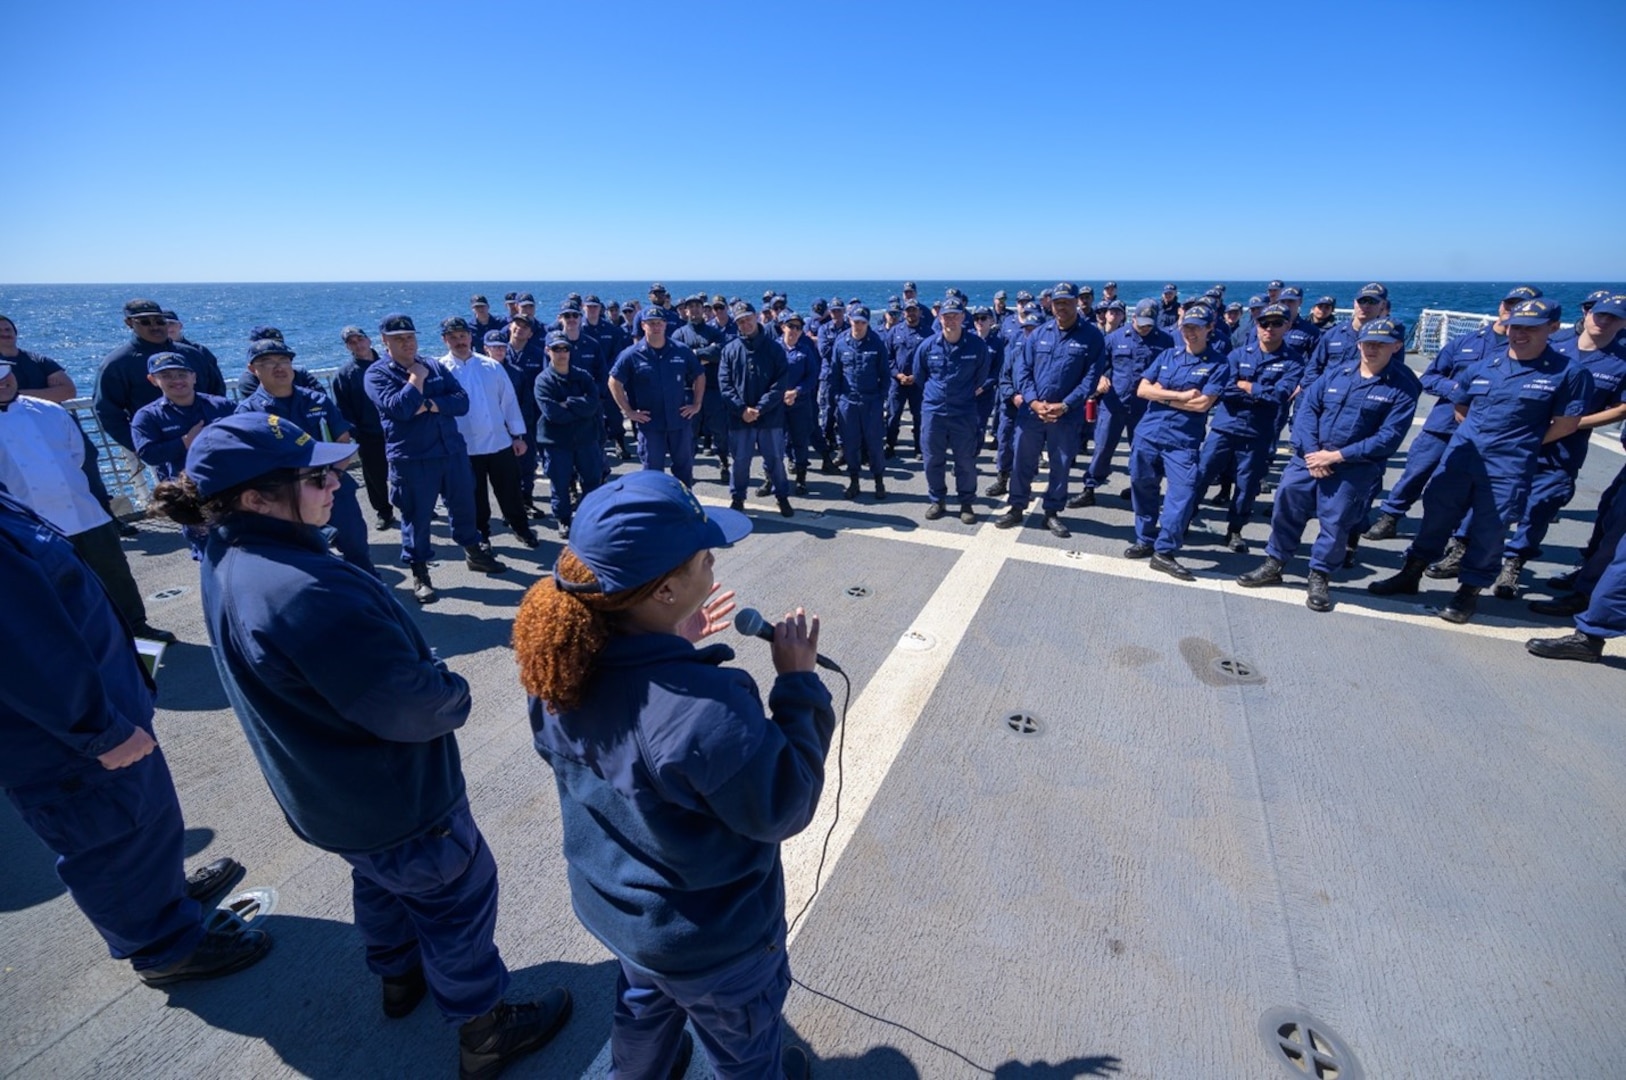 Crewmembers of the Coast Guard Cutter Munro assemble to hear pass down information from the cutter’s command. USCG photo.